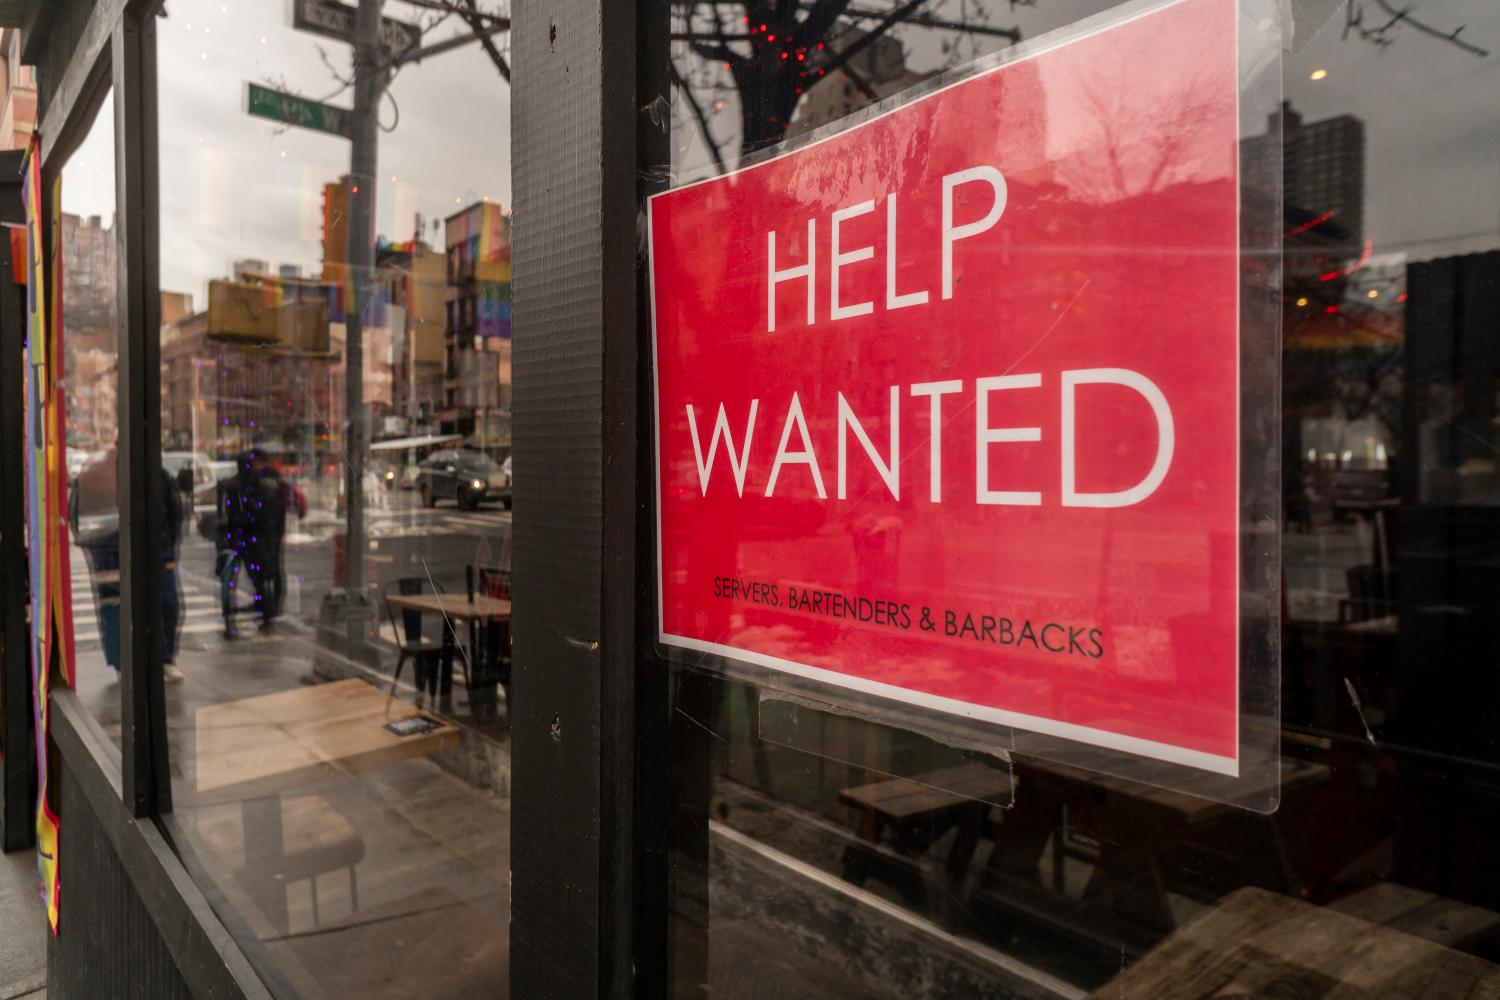 Help wanted sign in a restaurant window in HellÕs Kitchen in New York on Sunday, January 9, 2022. (Photo by Richard B. Levine)No Use Germany.